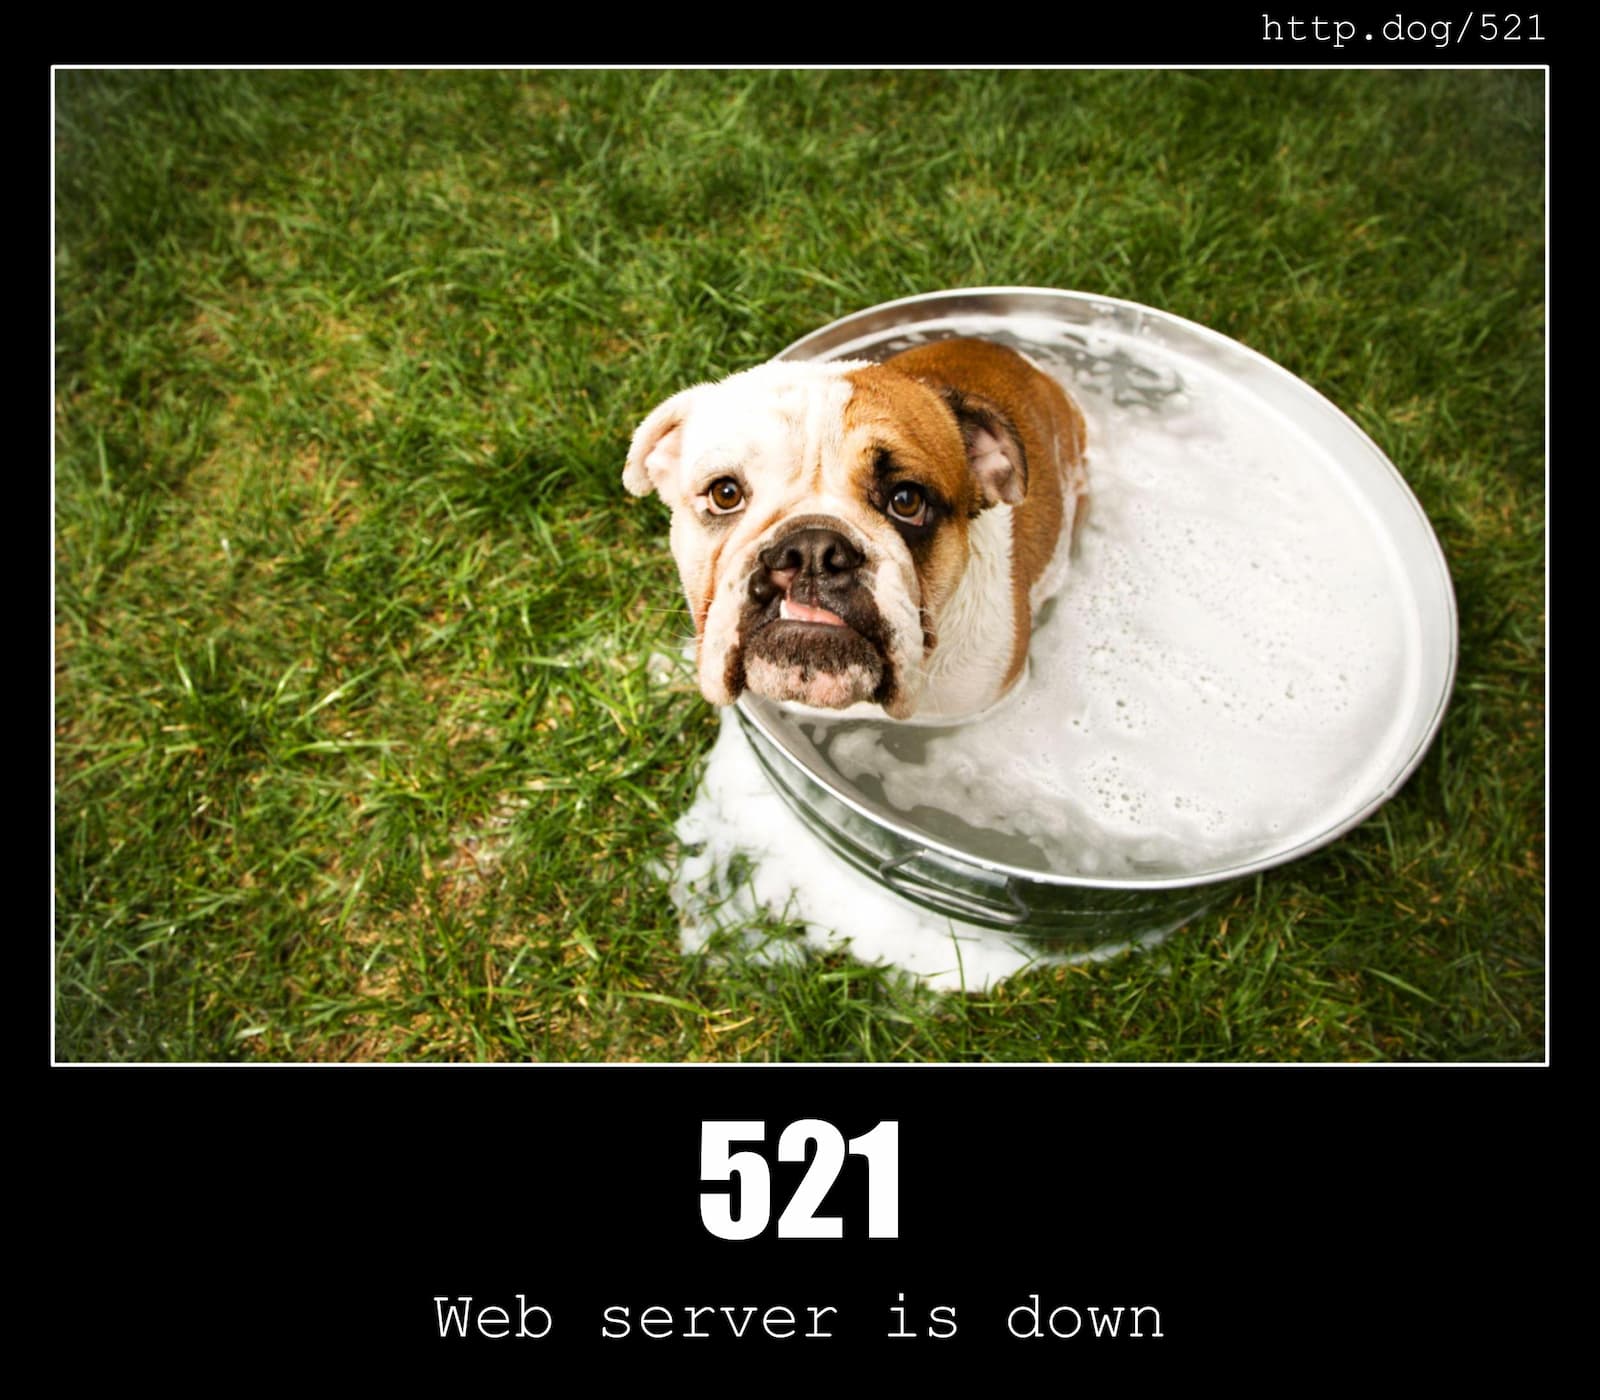 HTTP Status Code 521 Web server is down & Dogs